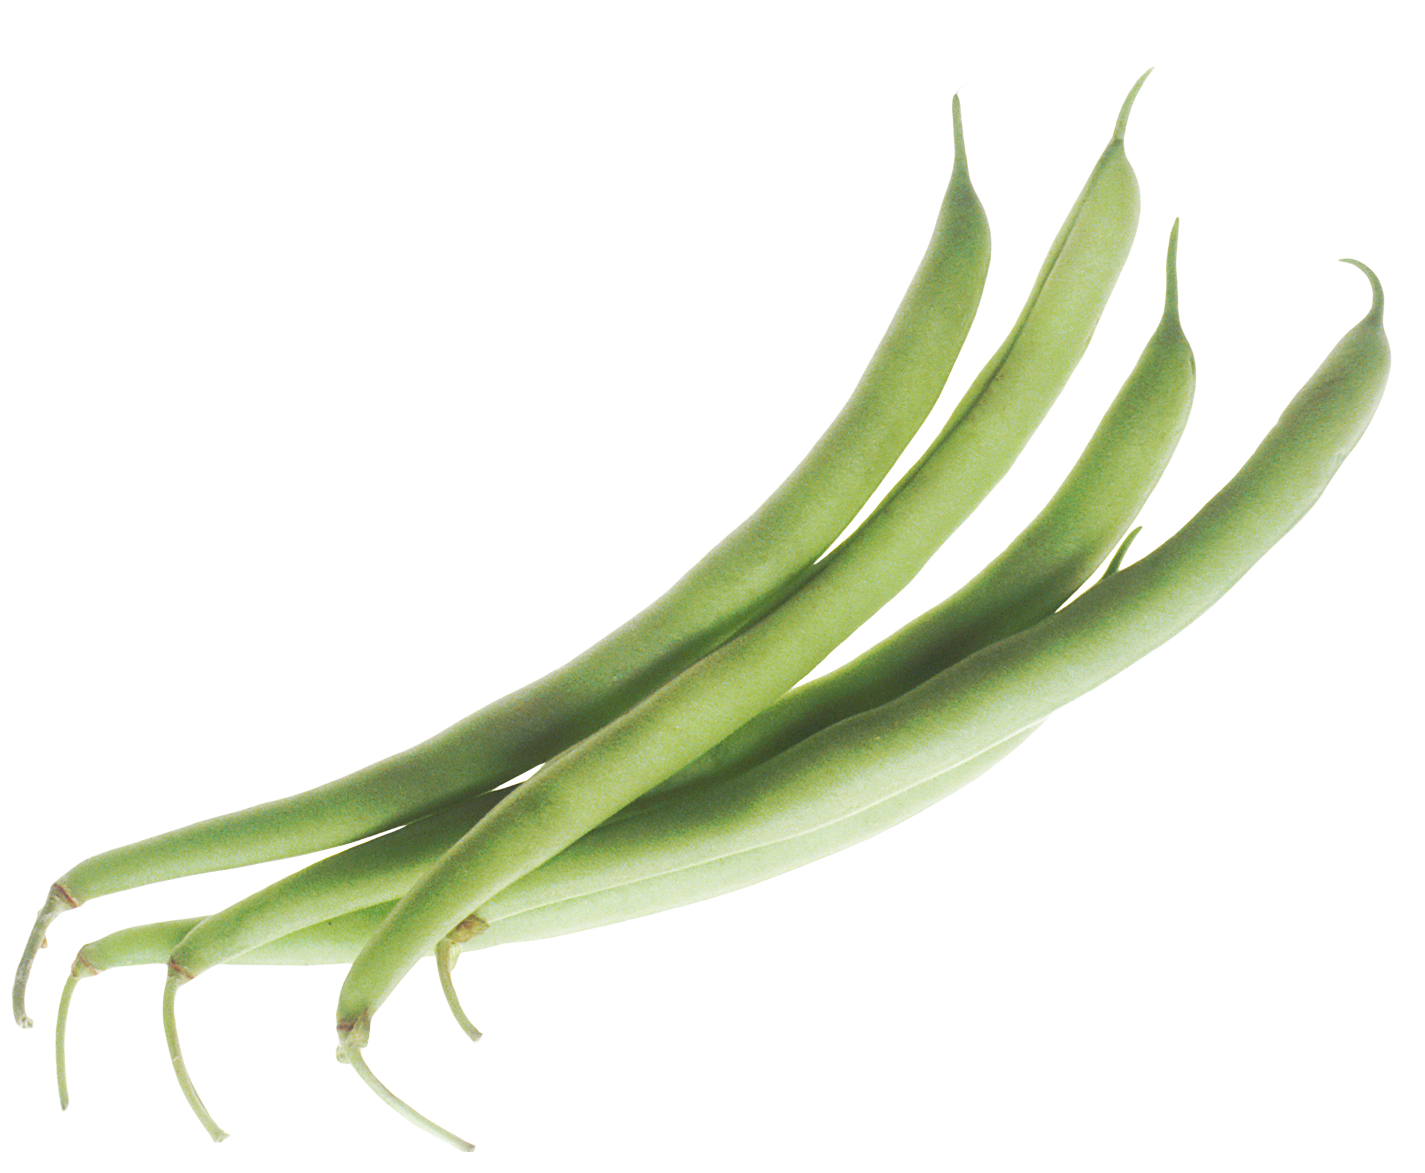 French Beans Background PNG Image